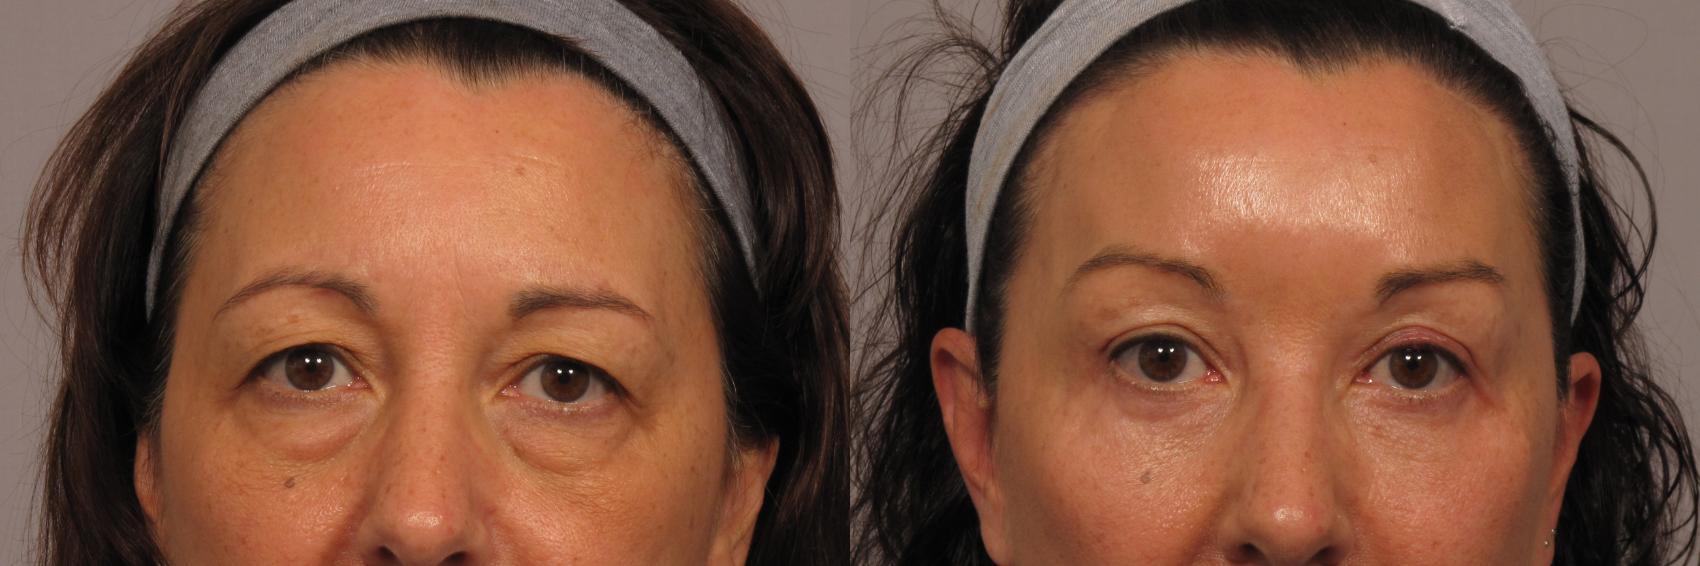 Front View of Patient who underwent eyelid lift and brow lift